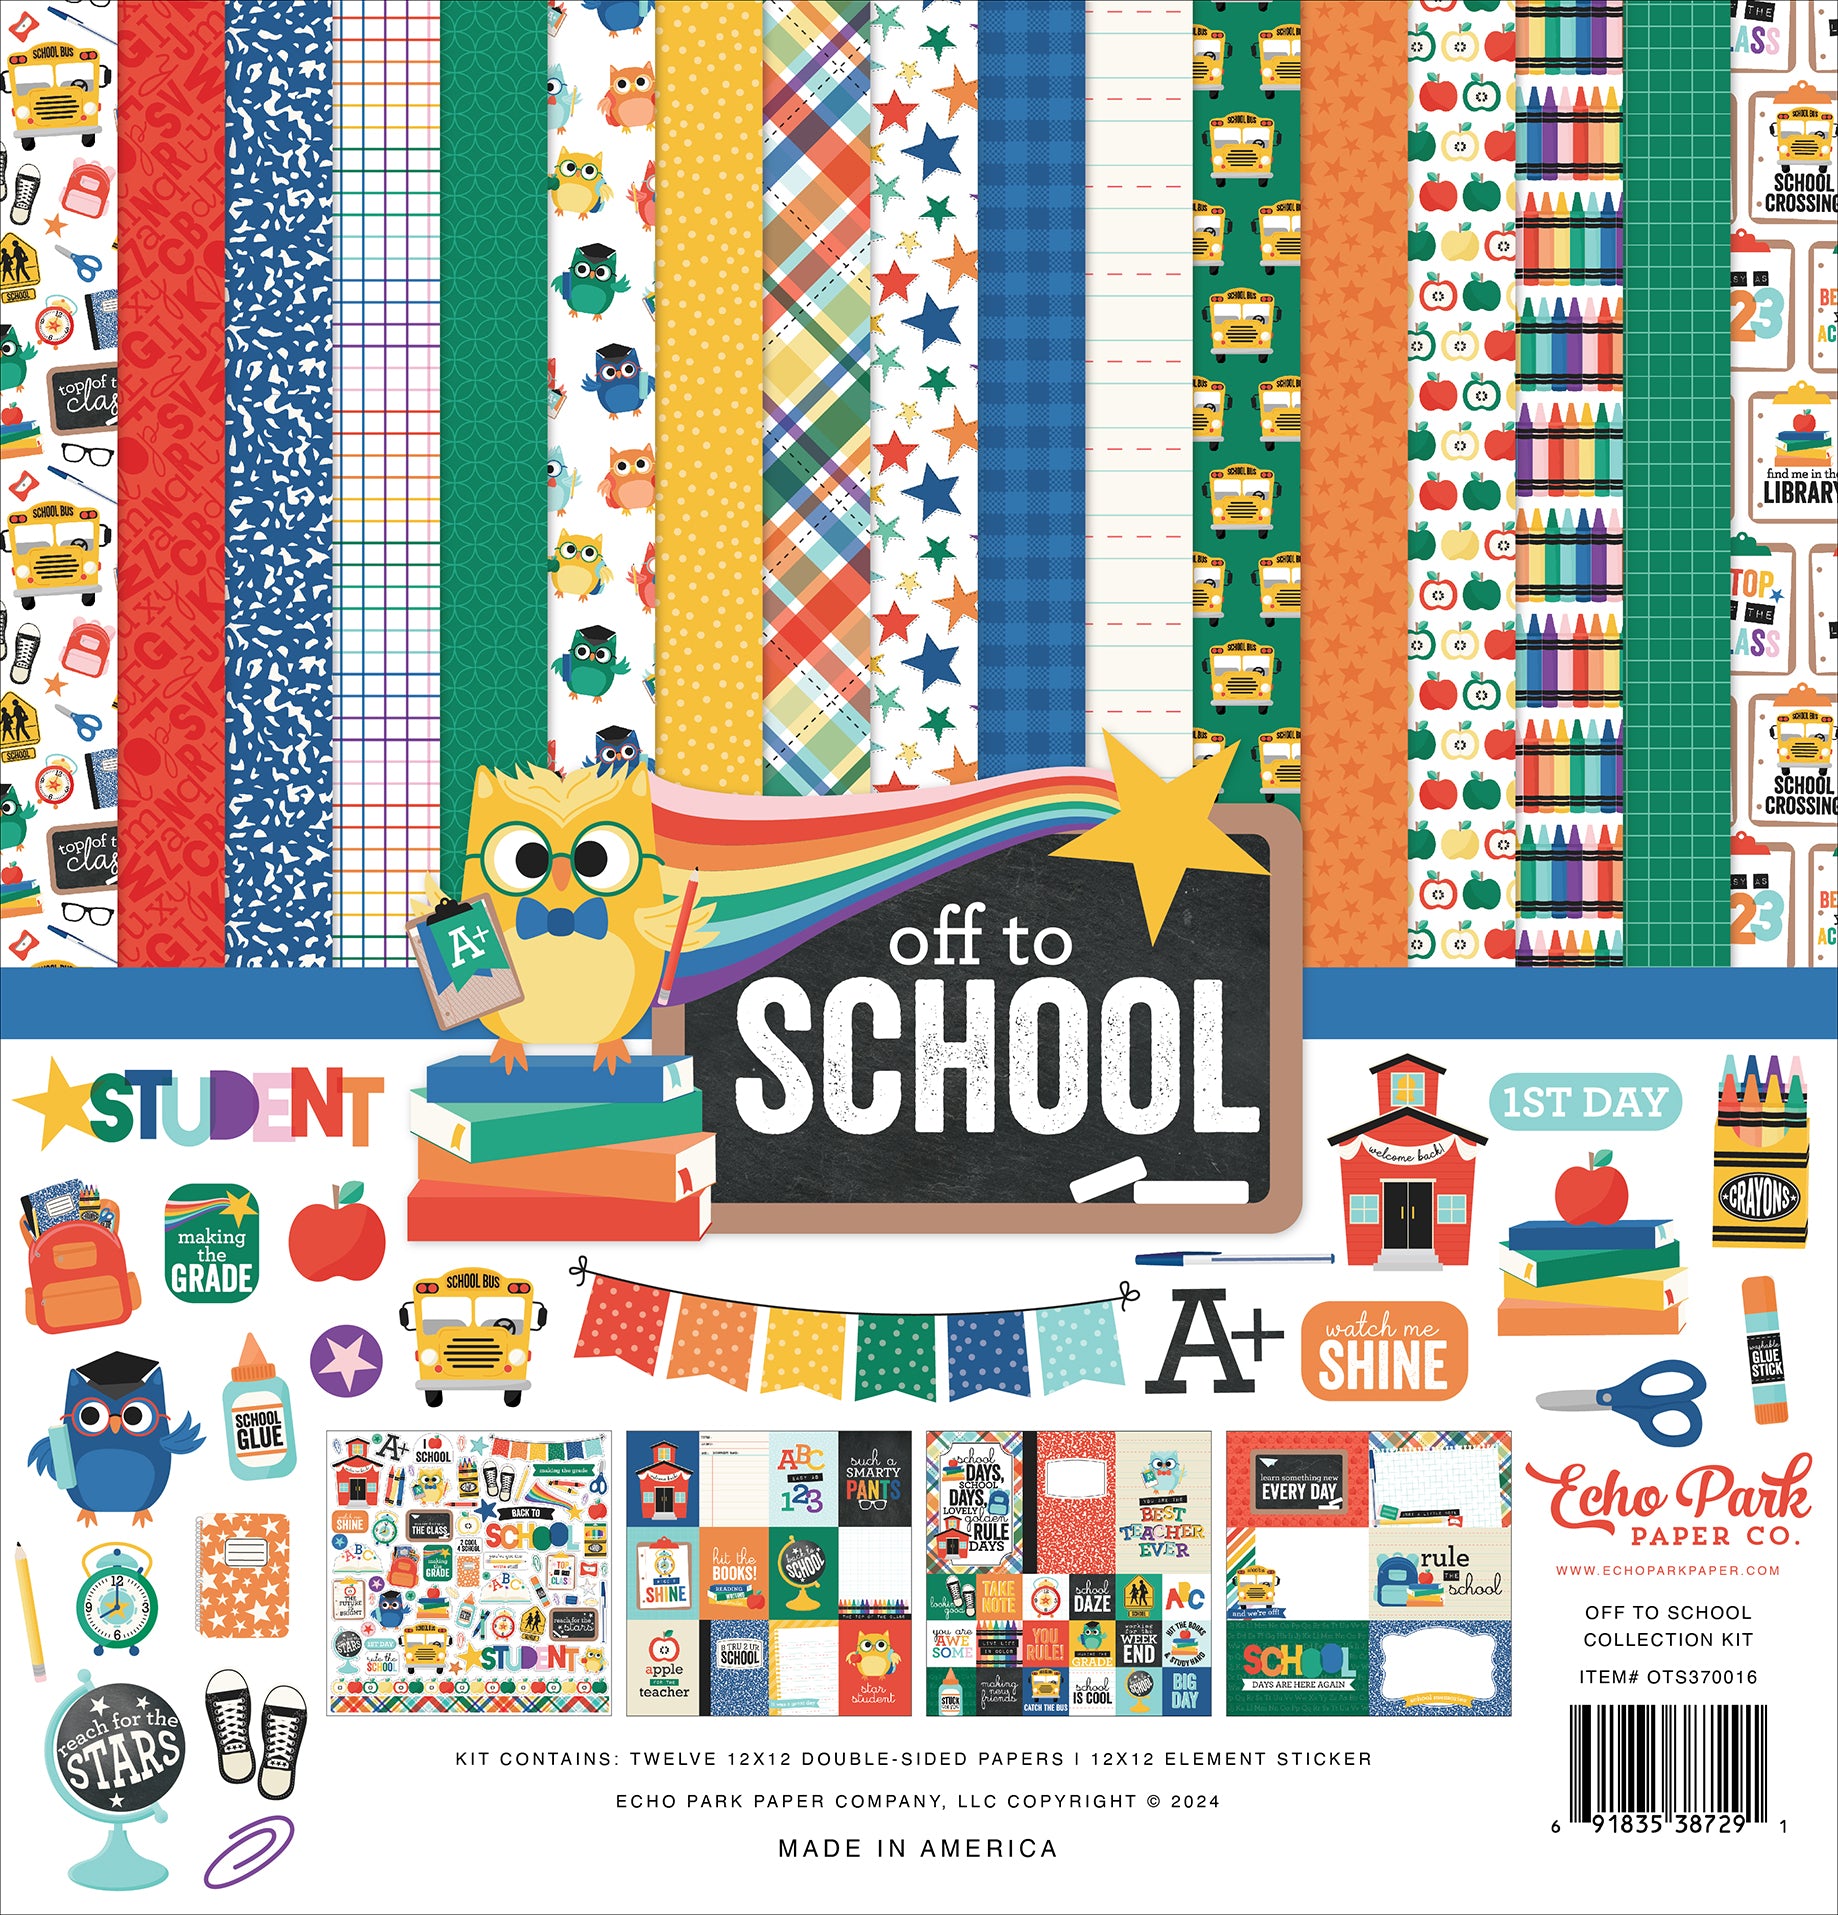 Off to School Collection 12 x 12 Scrapbook Collection Kit by Echo Park Paper